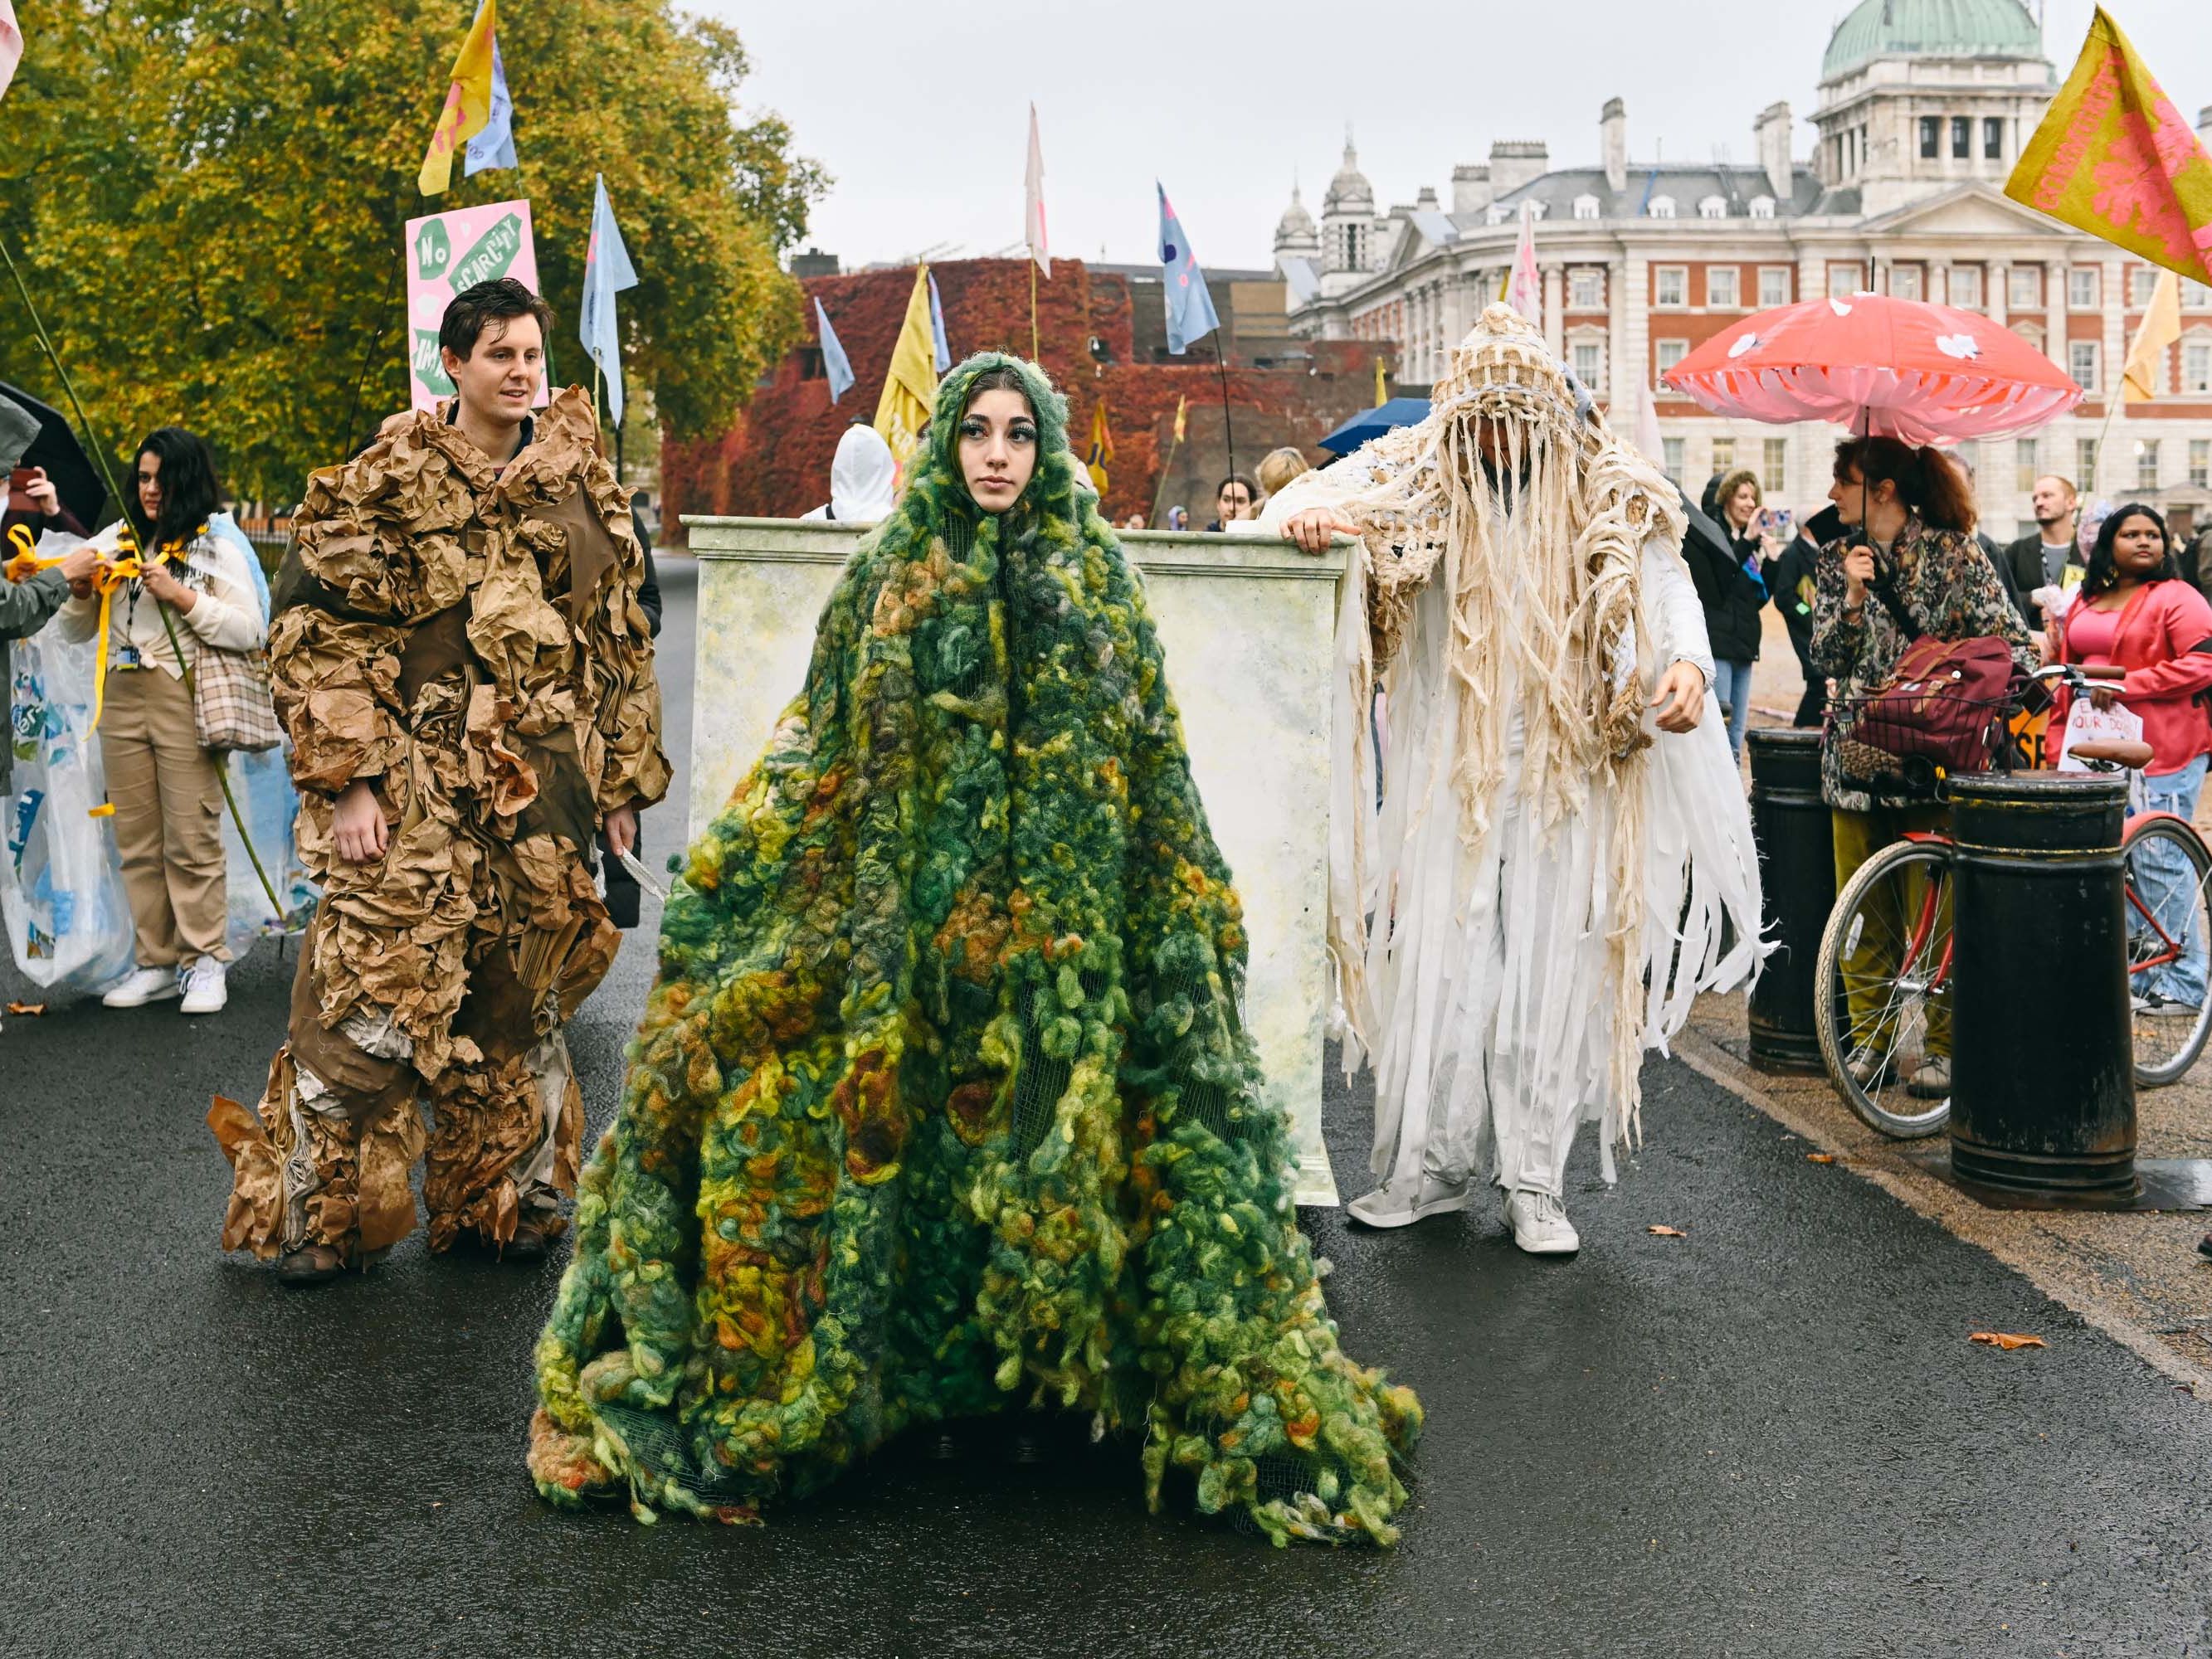 Figures standing  wearing green moss, cardboard and pale fabric garments